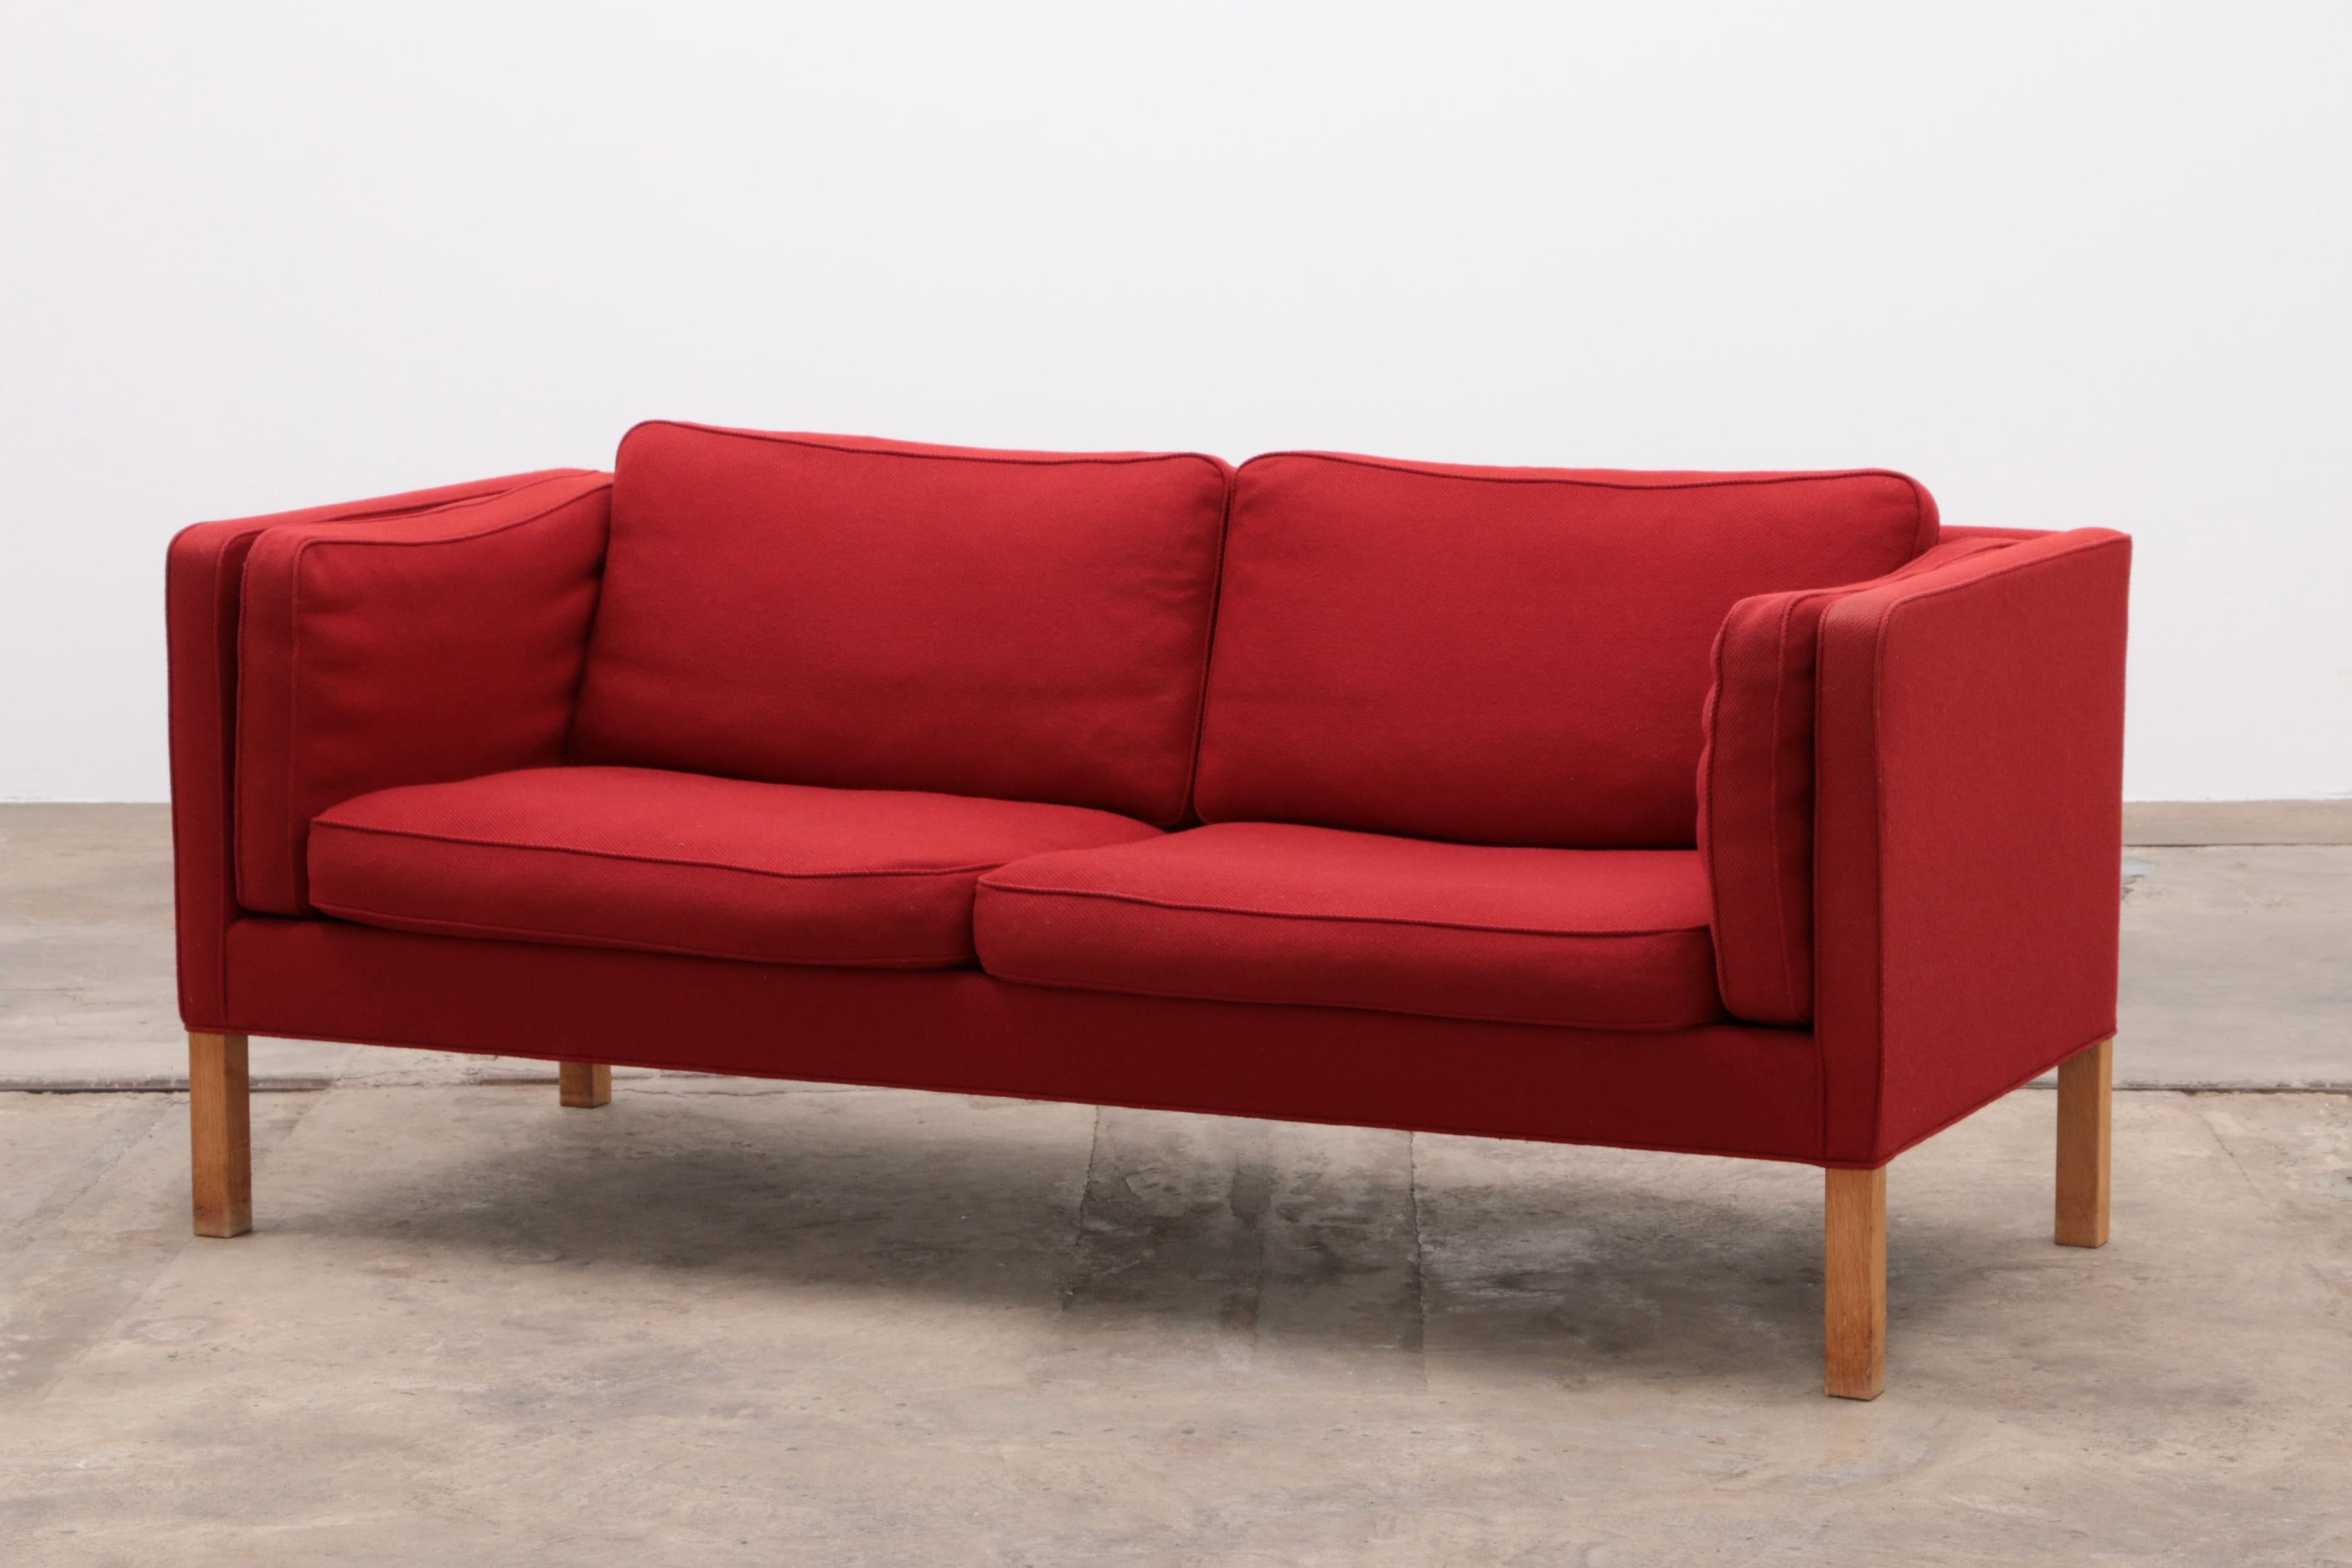 Scandinavian Modern Vintage Seater Sofa By Børge And Peter Mogensen For Fredericia Model 2335